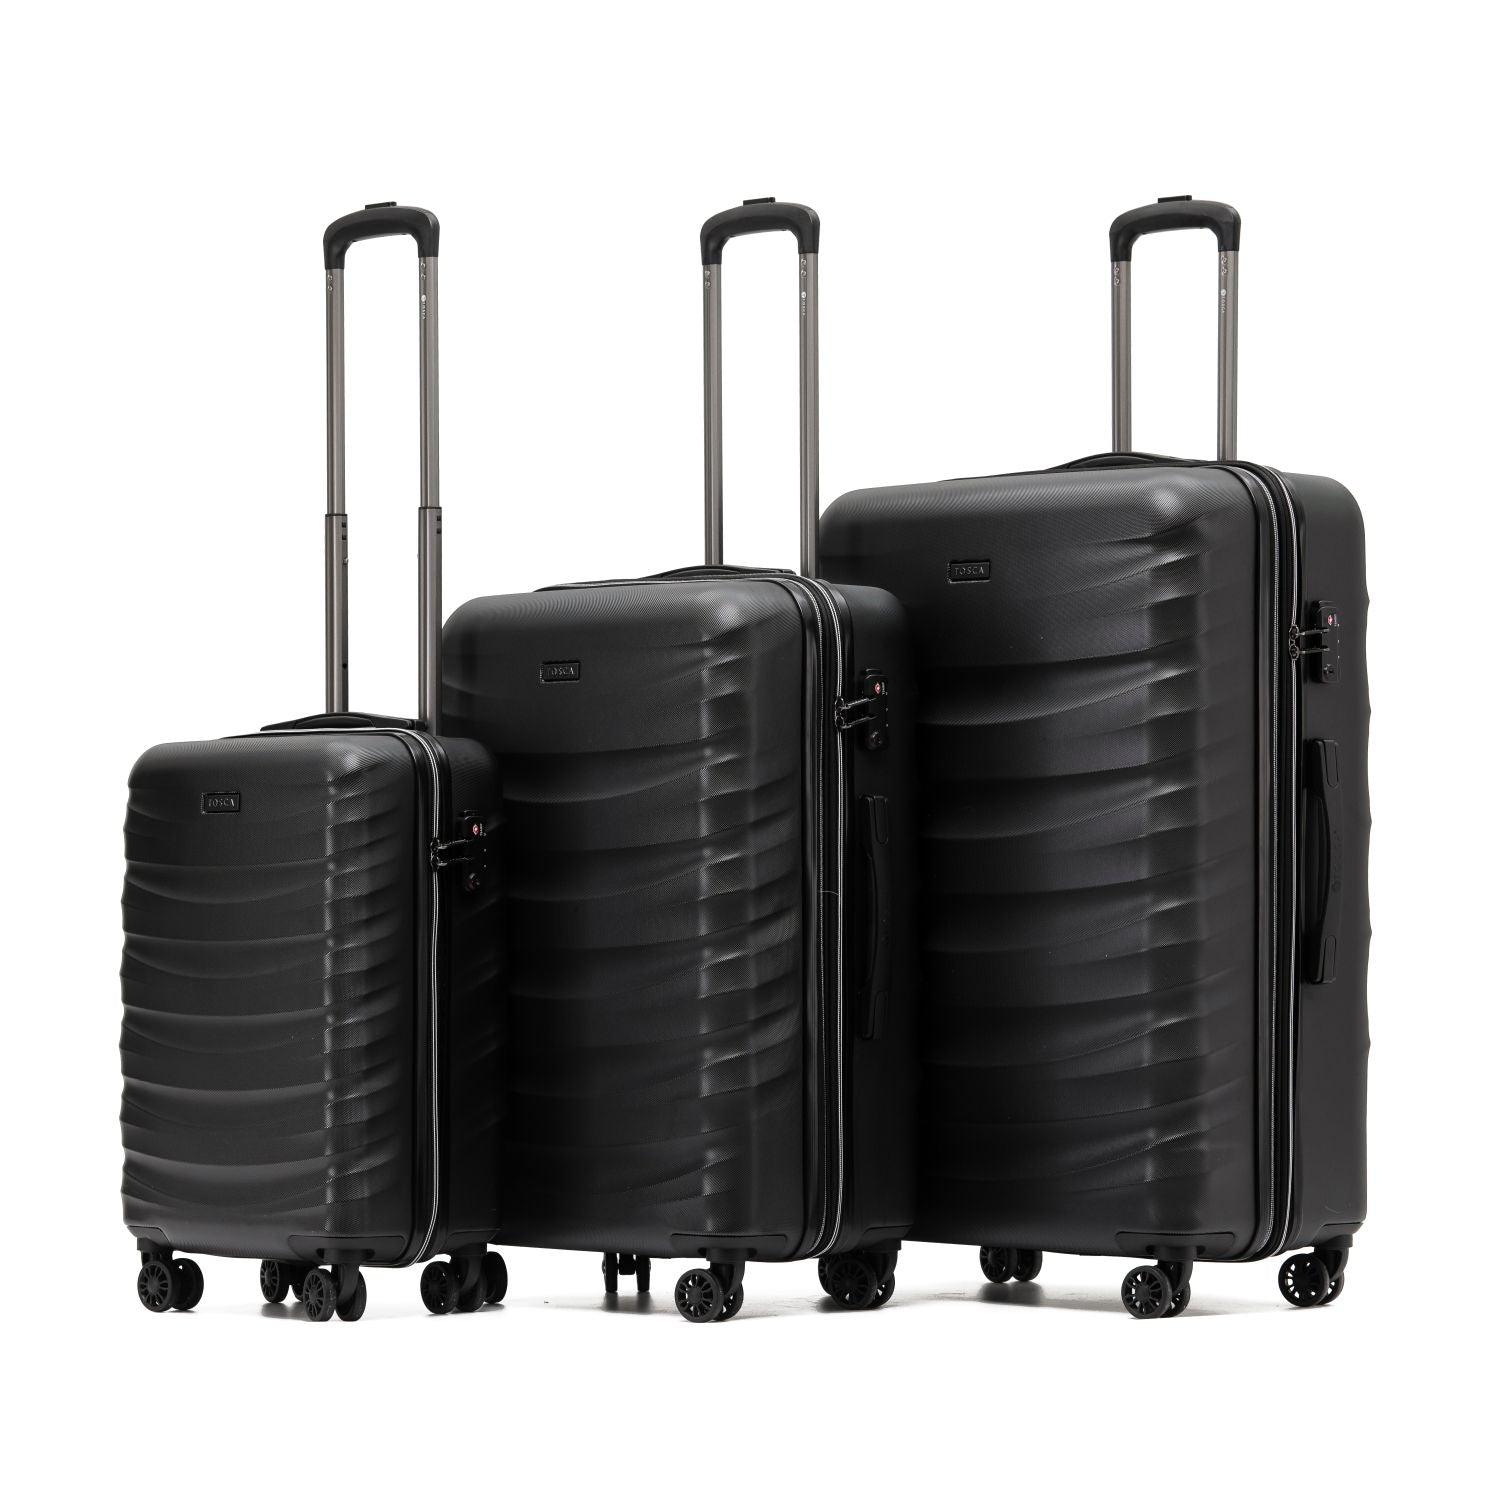 Hardshell Luggage u0026 Suitcase Protect Your Travel Gear | Bags To Go